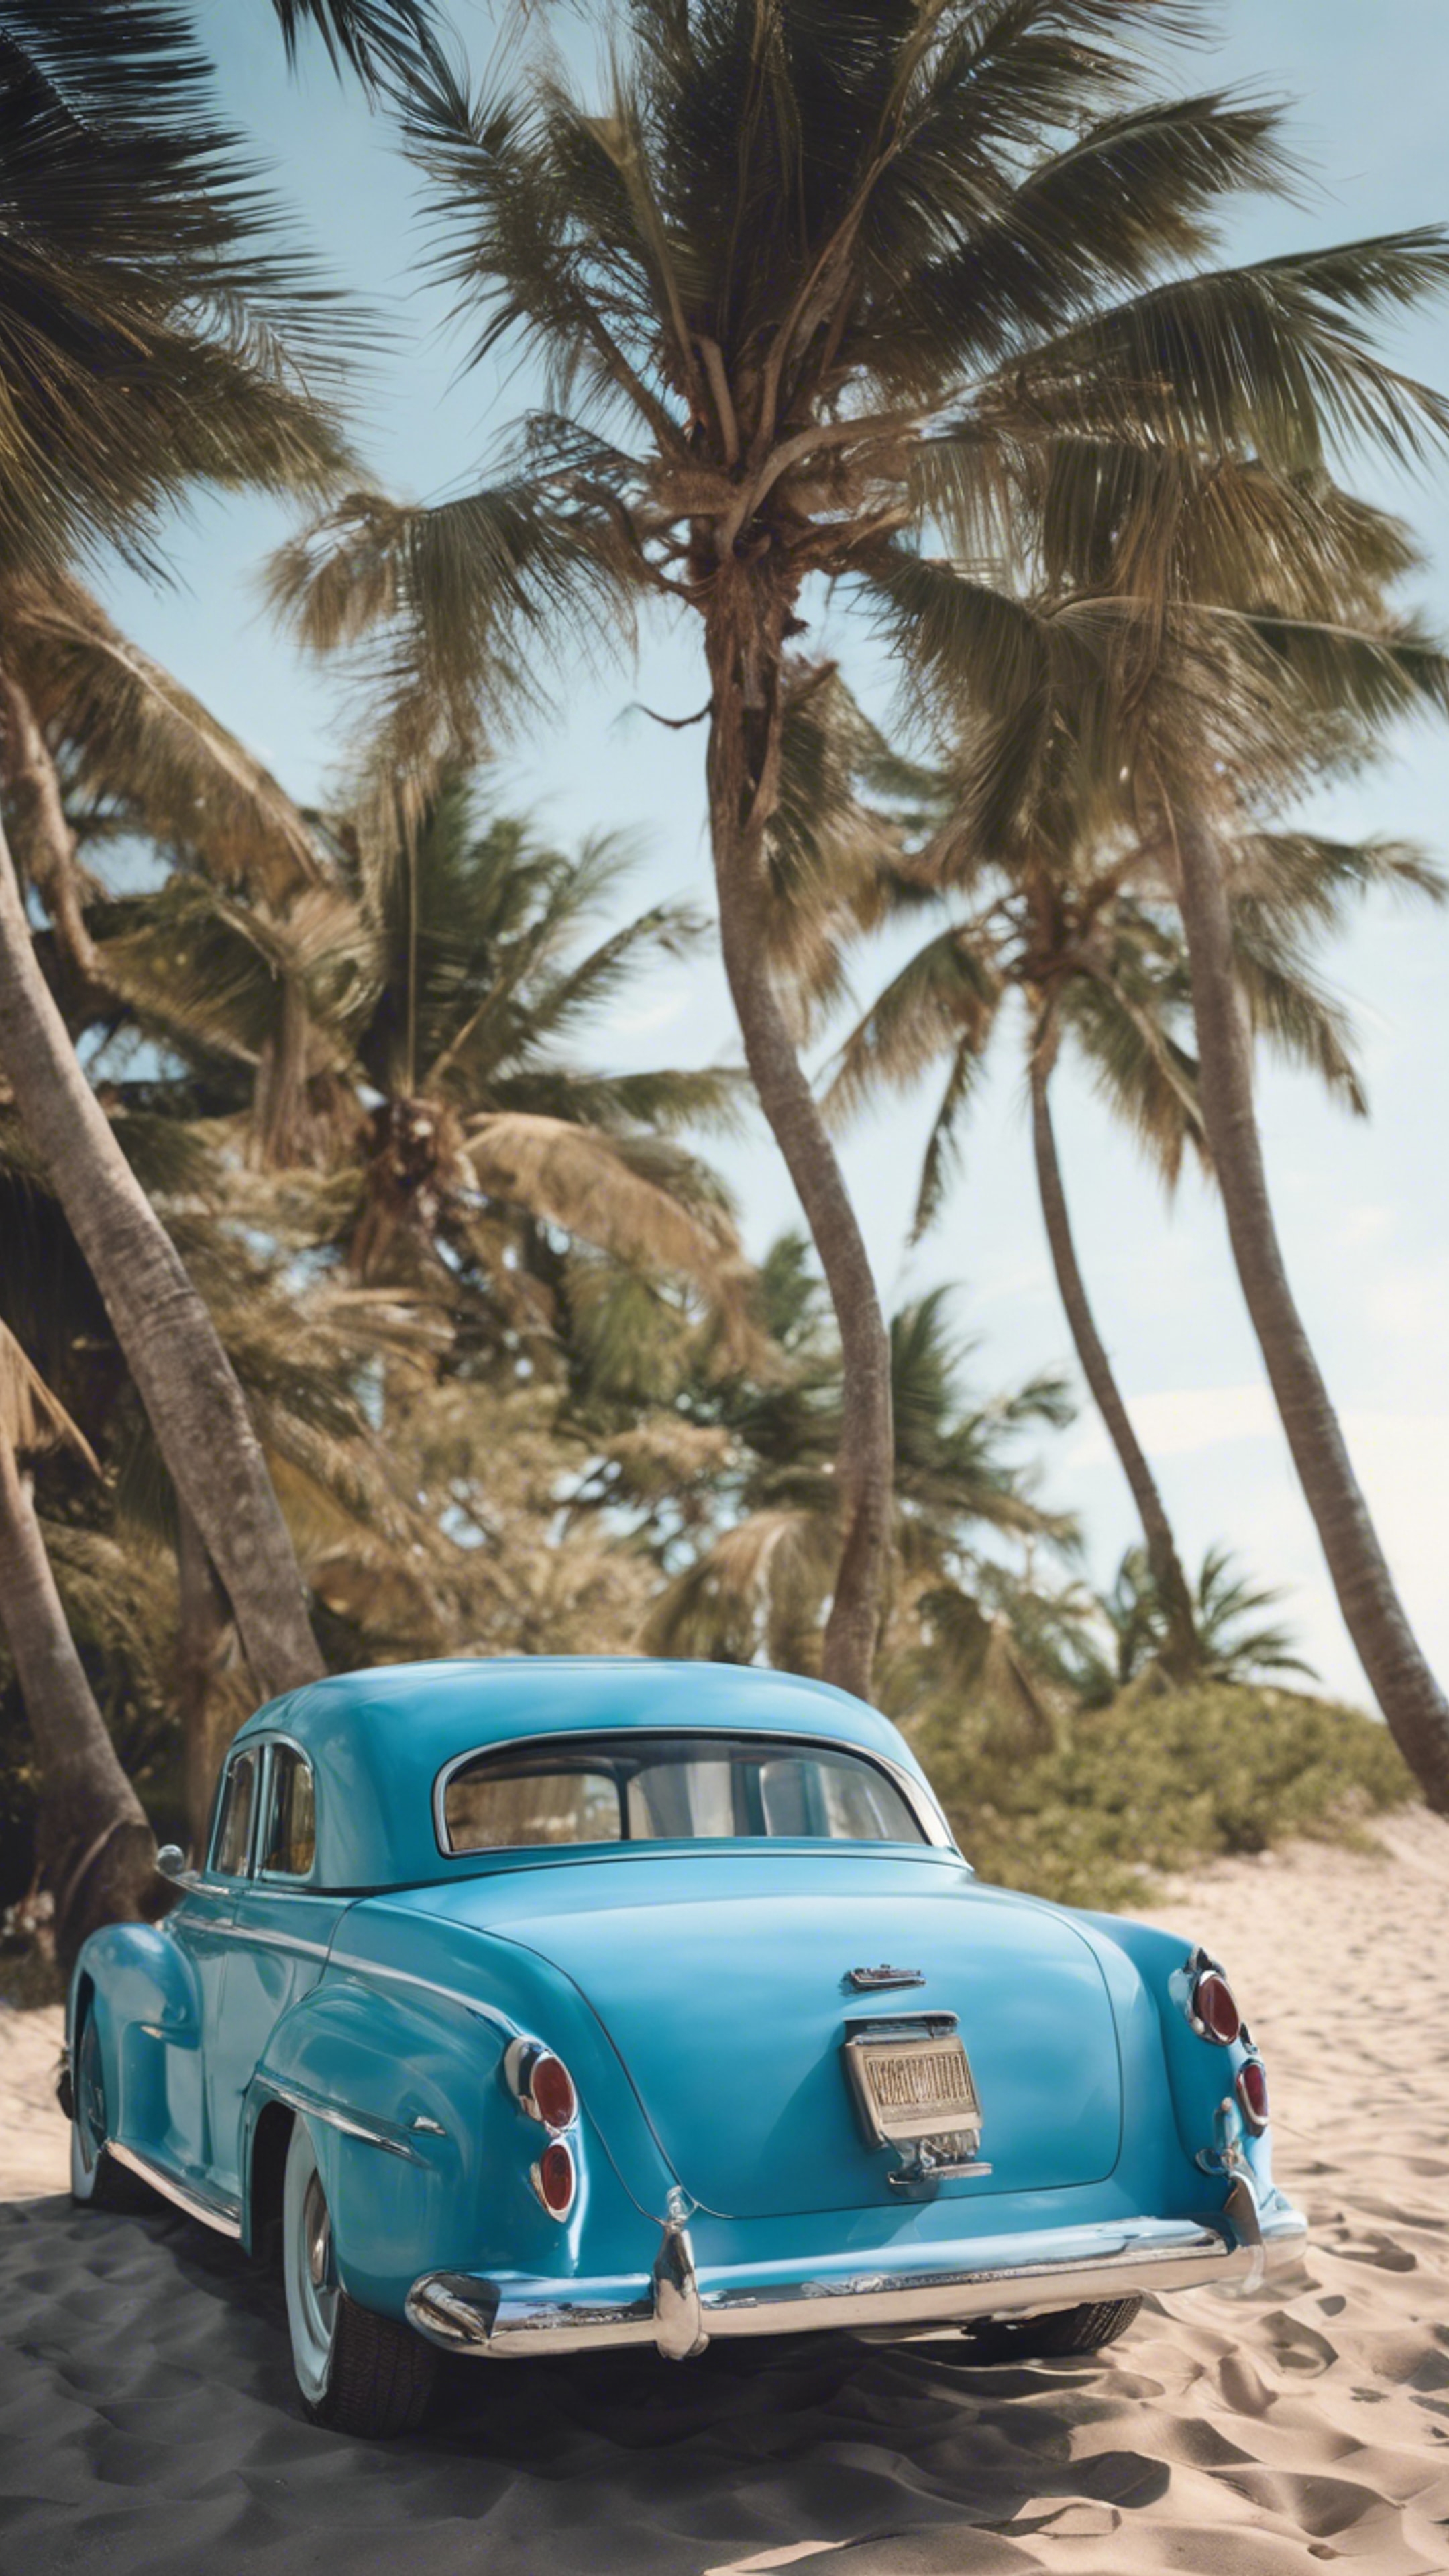 A vintage car painted in cool blue, parked by the beach Fondo de pantalla[7559f4037ca44818afd1]